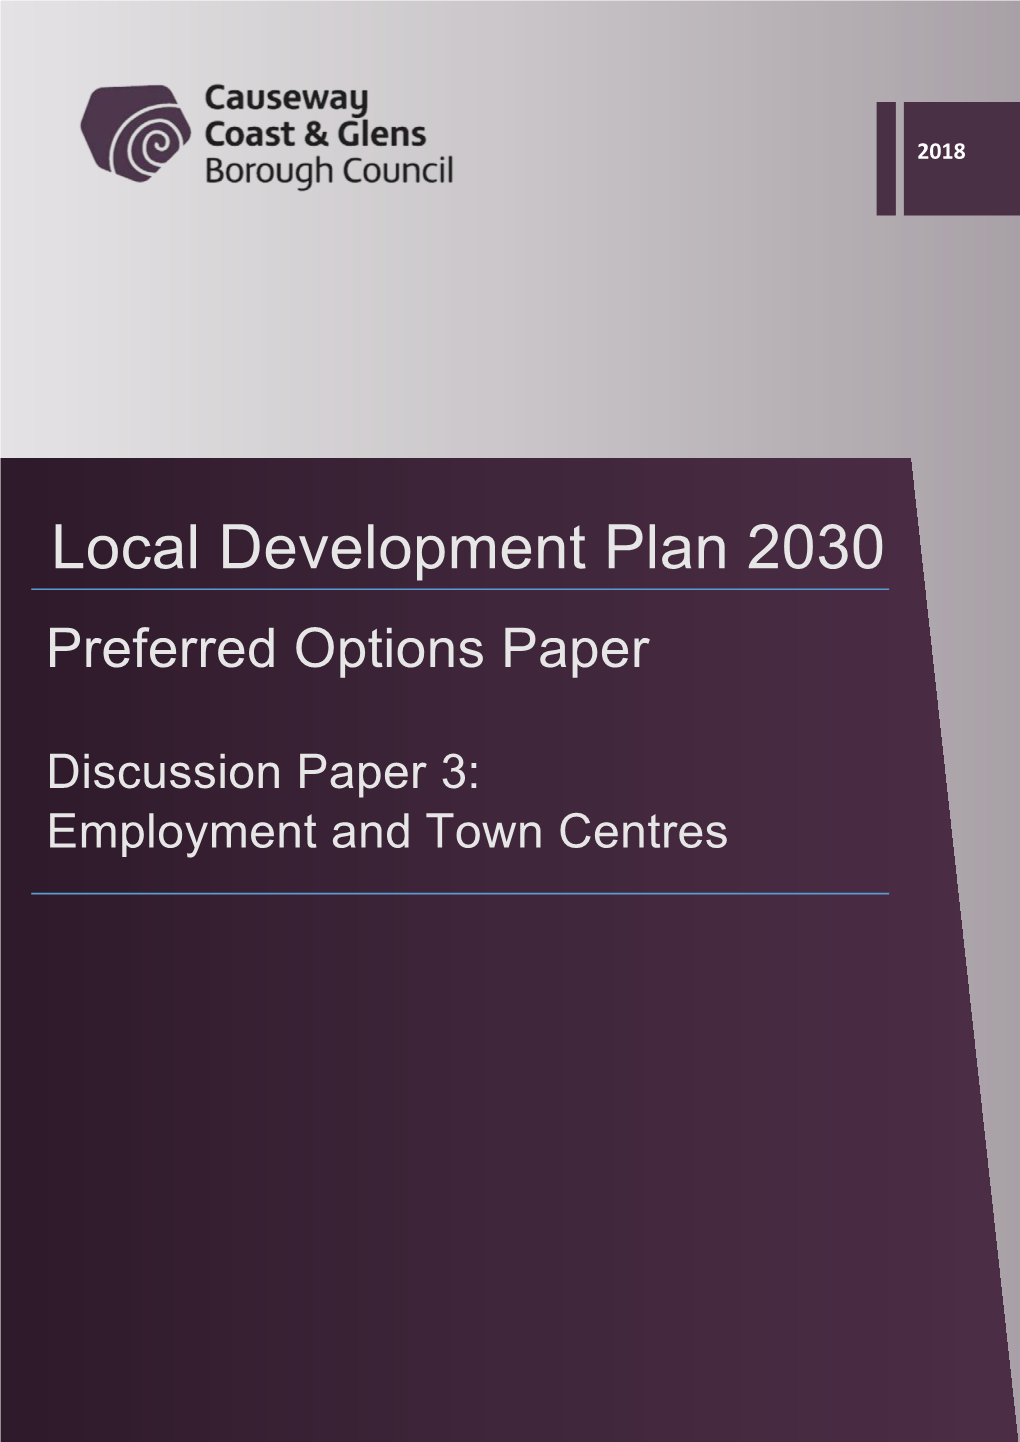 Employment and Town Centres